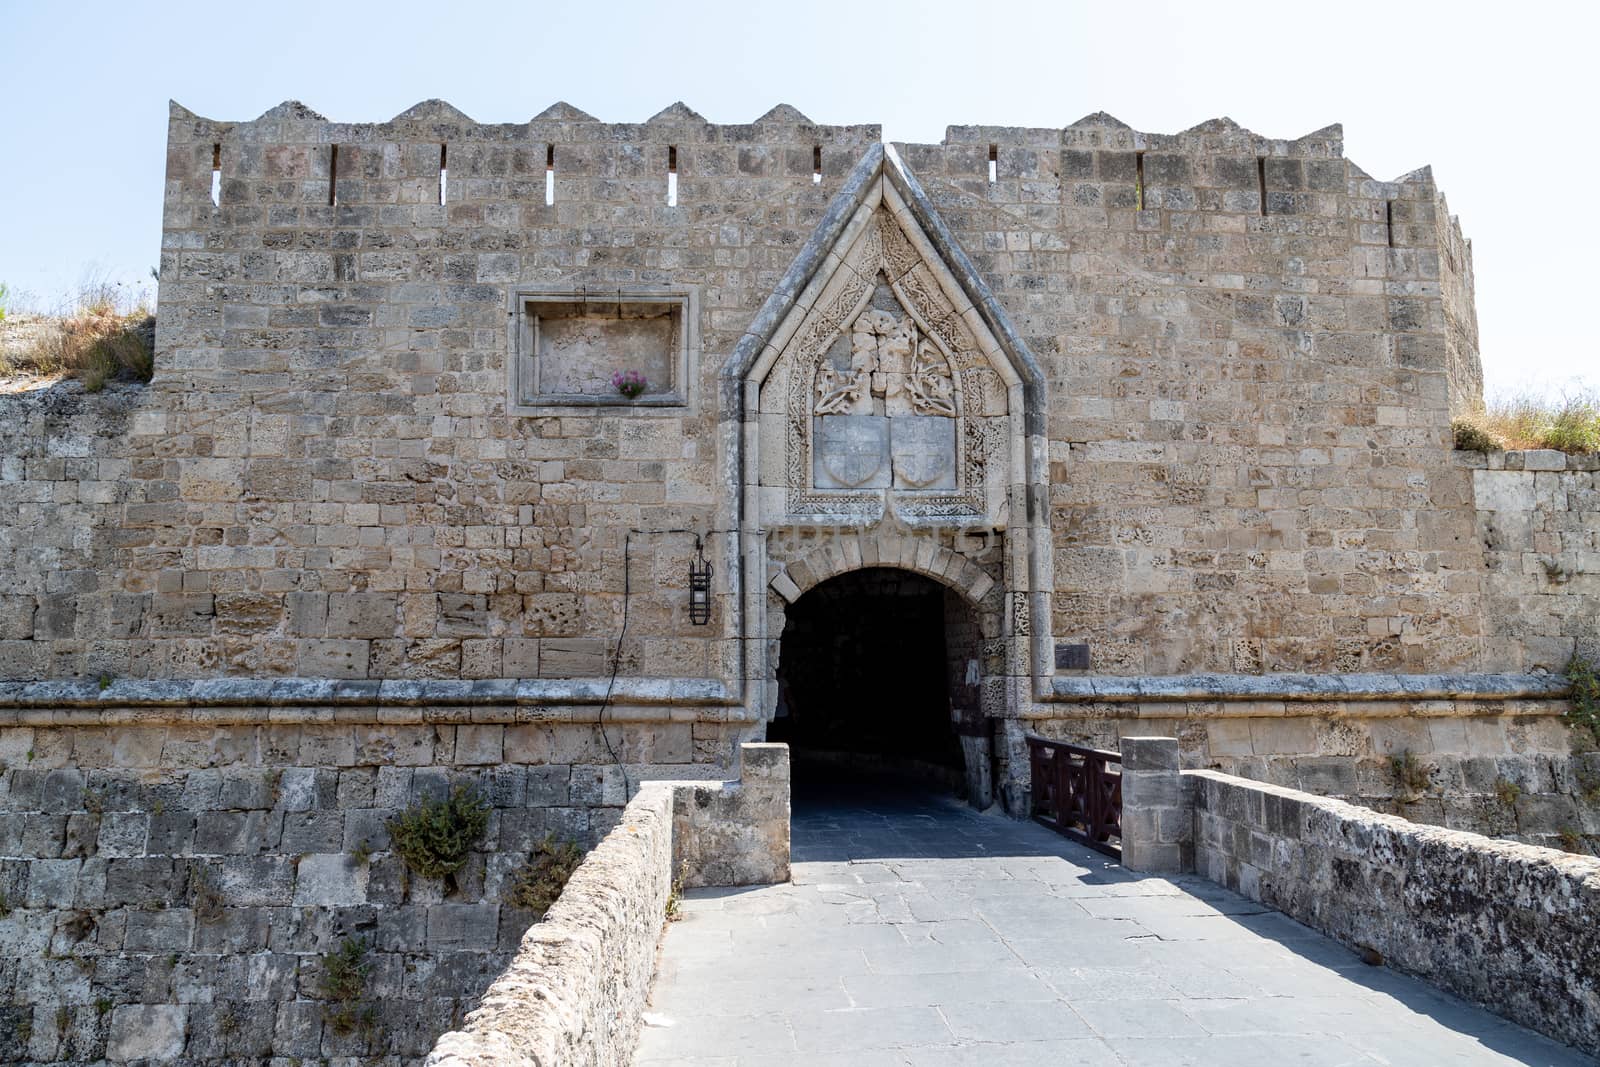 Entrance gate in the city walls of the old town of Rhodes town by reinerc